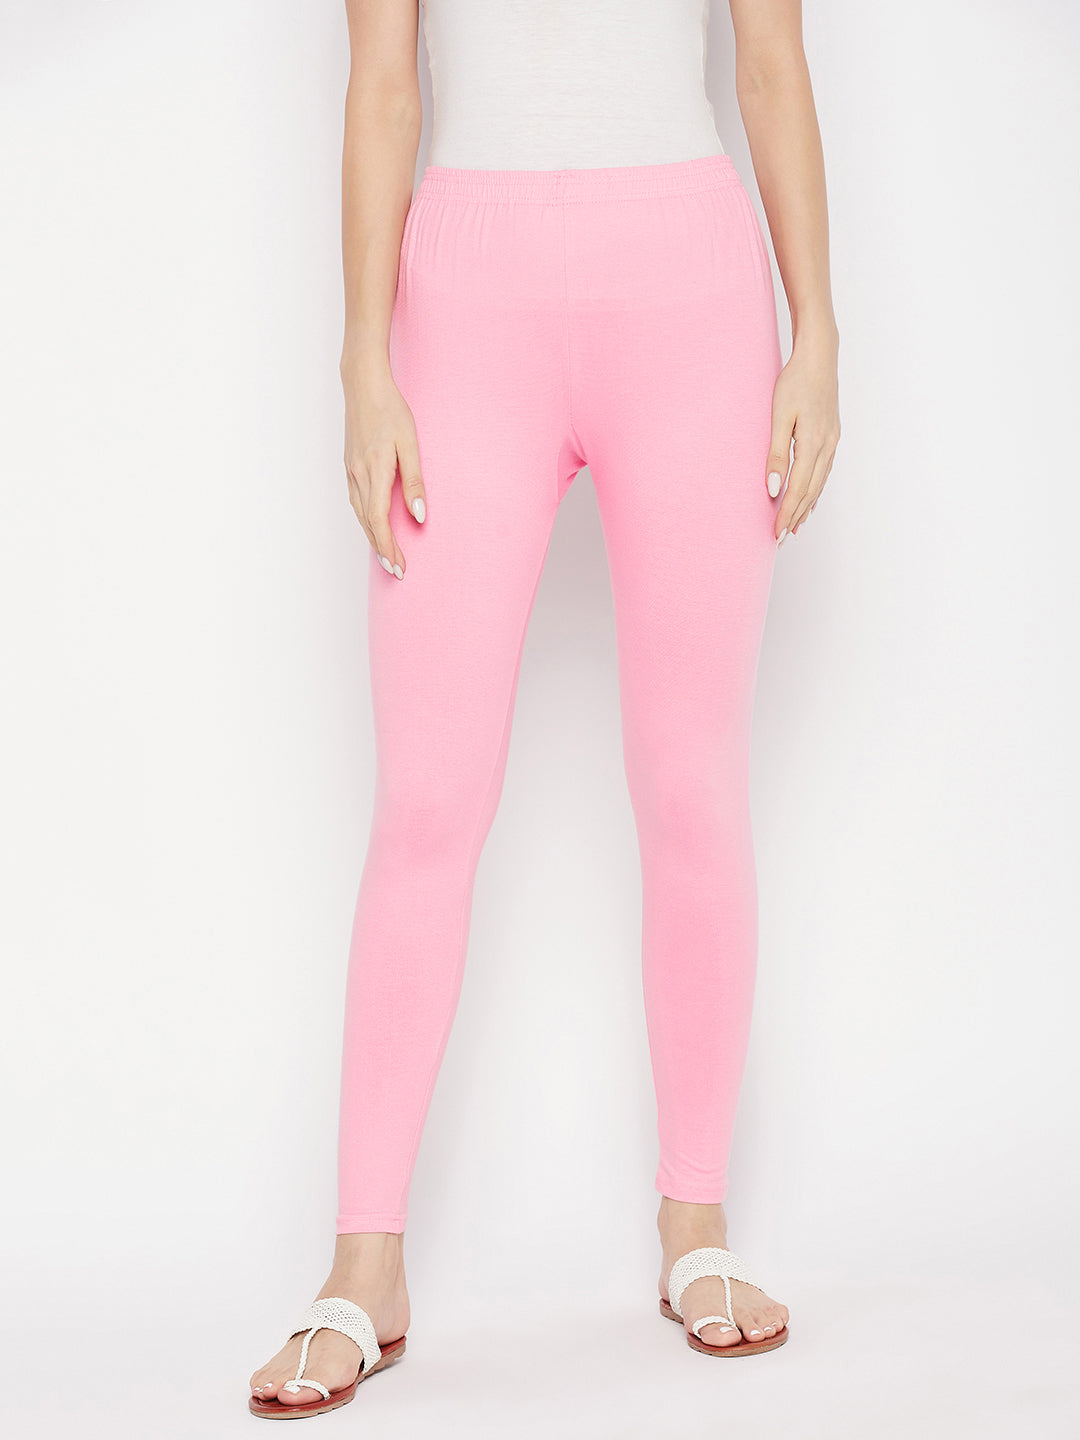 Clora Baby Pink Solid Ankle Length Leggings